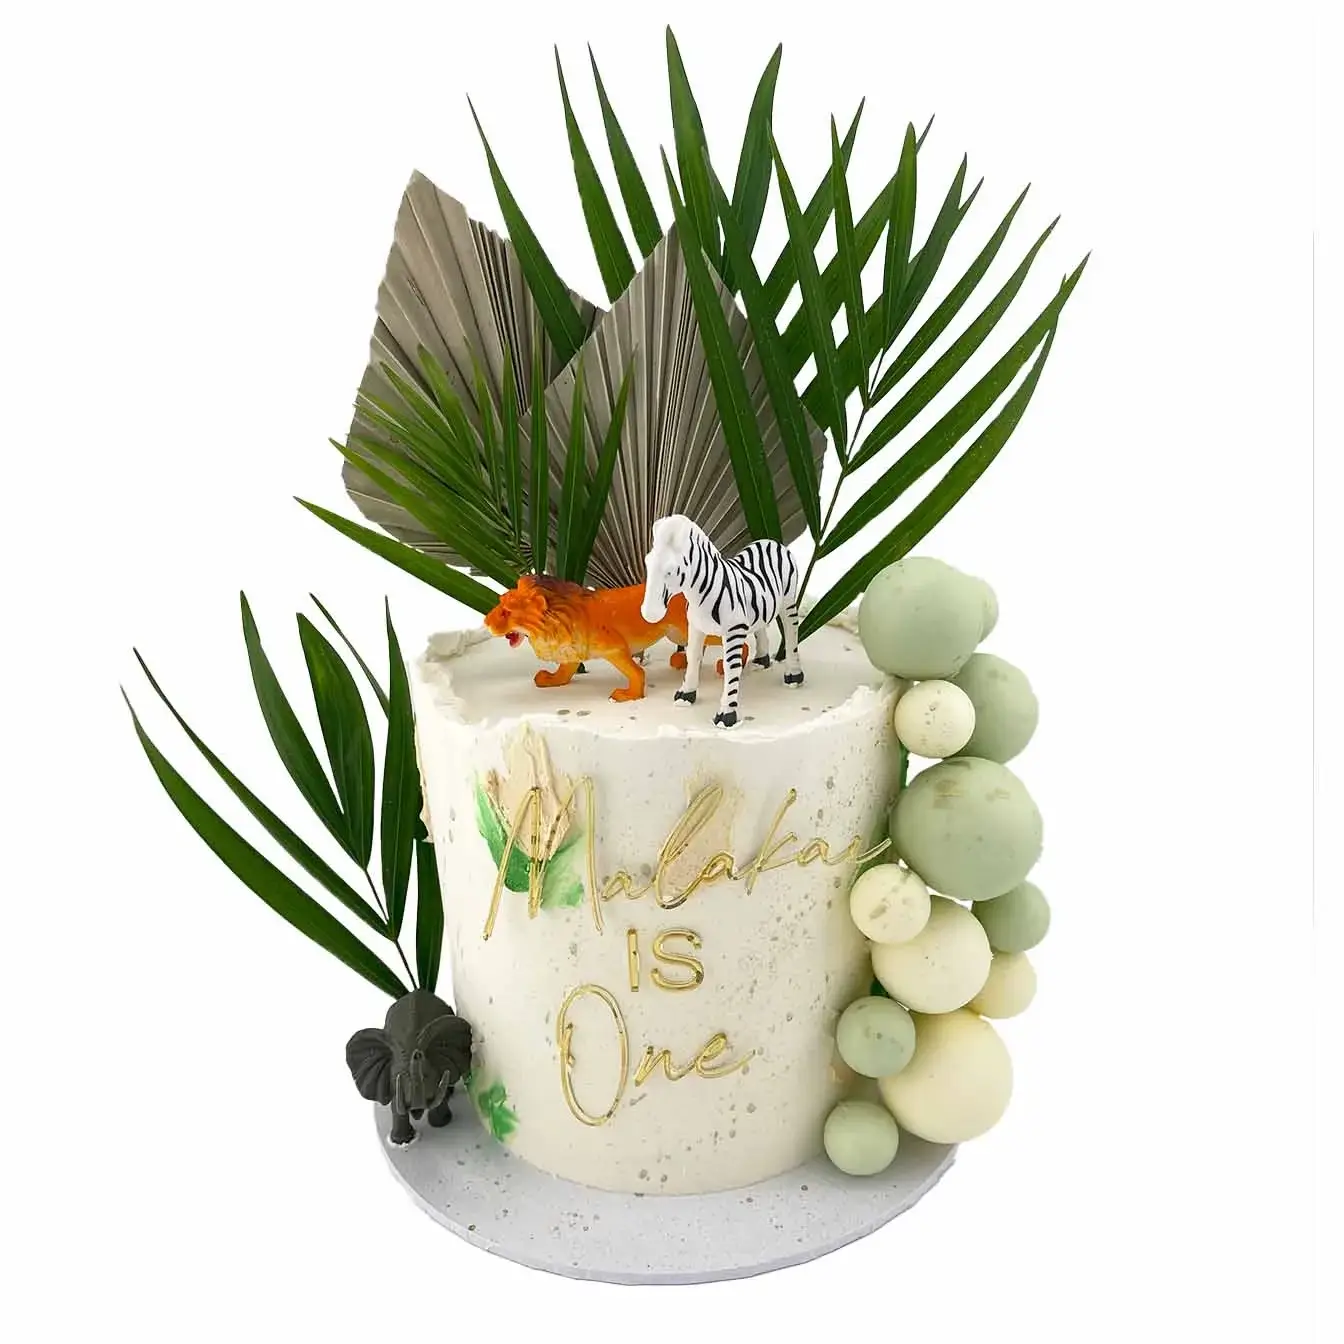 Jungle Adventure Cake with White Base, Green Accents, Gold Splatter, Malakai Topper, Animal Toys, Chocolate Spheres, and Jungle Leaves